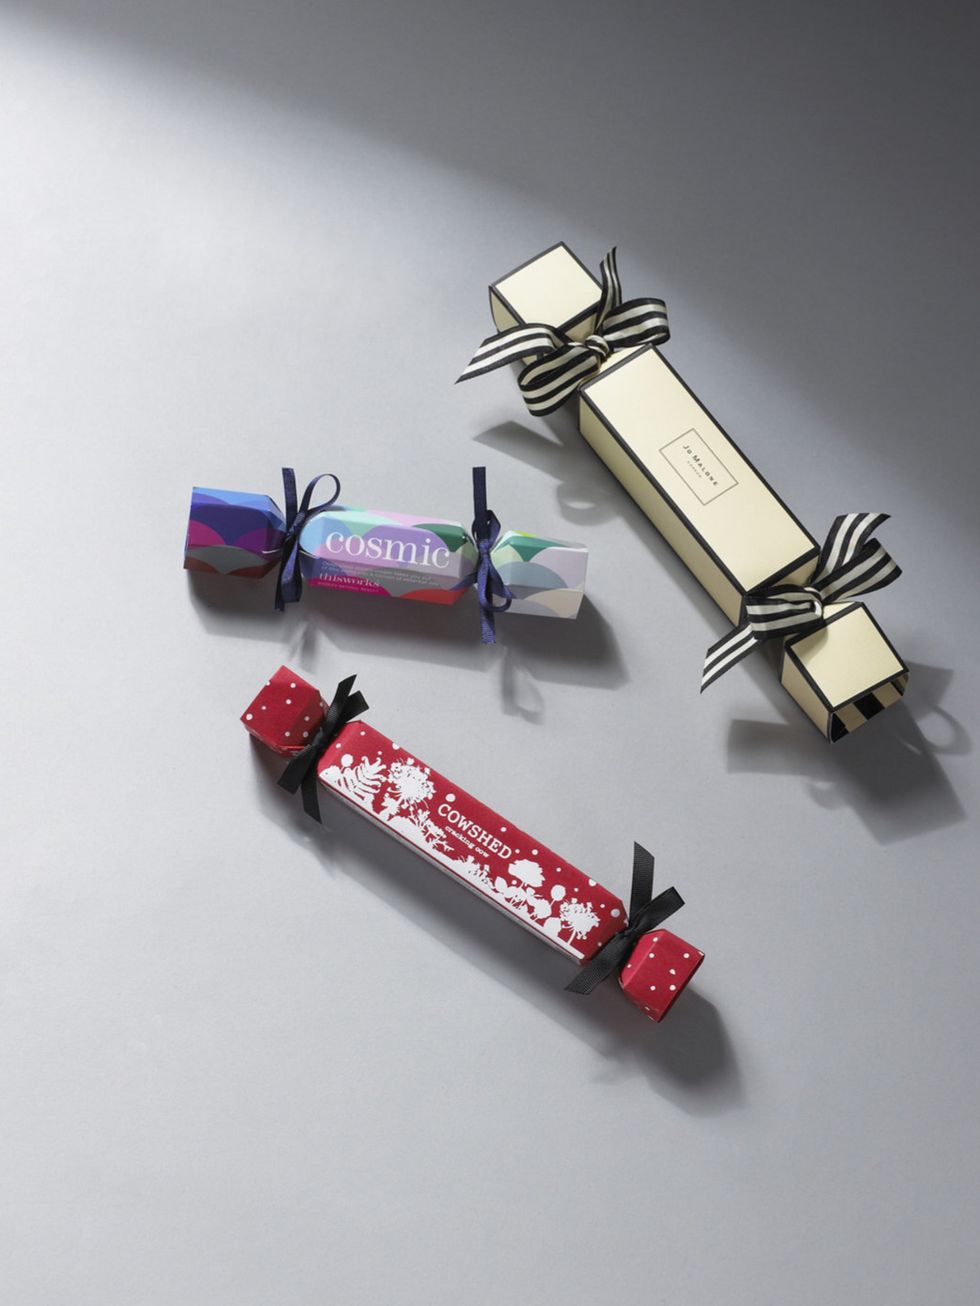 <p>Jo Malone, £30, Cow Shed, £10, this works cosmic crackers £9 will all be on Debbie Morgan's Christmas Dinner Table</p><p><a href="http://www.elleuk.com/promotion_old/cointreau3/simone-rocha-christmas-gift-guide">See what is on Simone Rocha's Christma